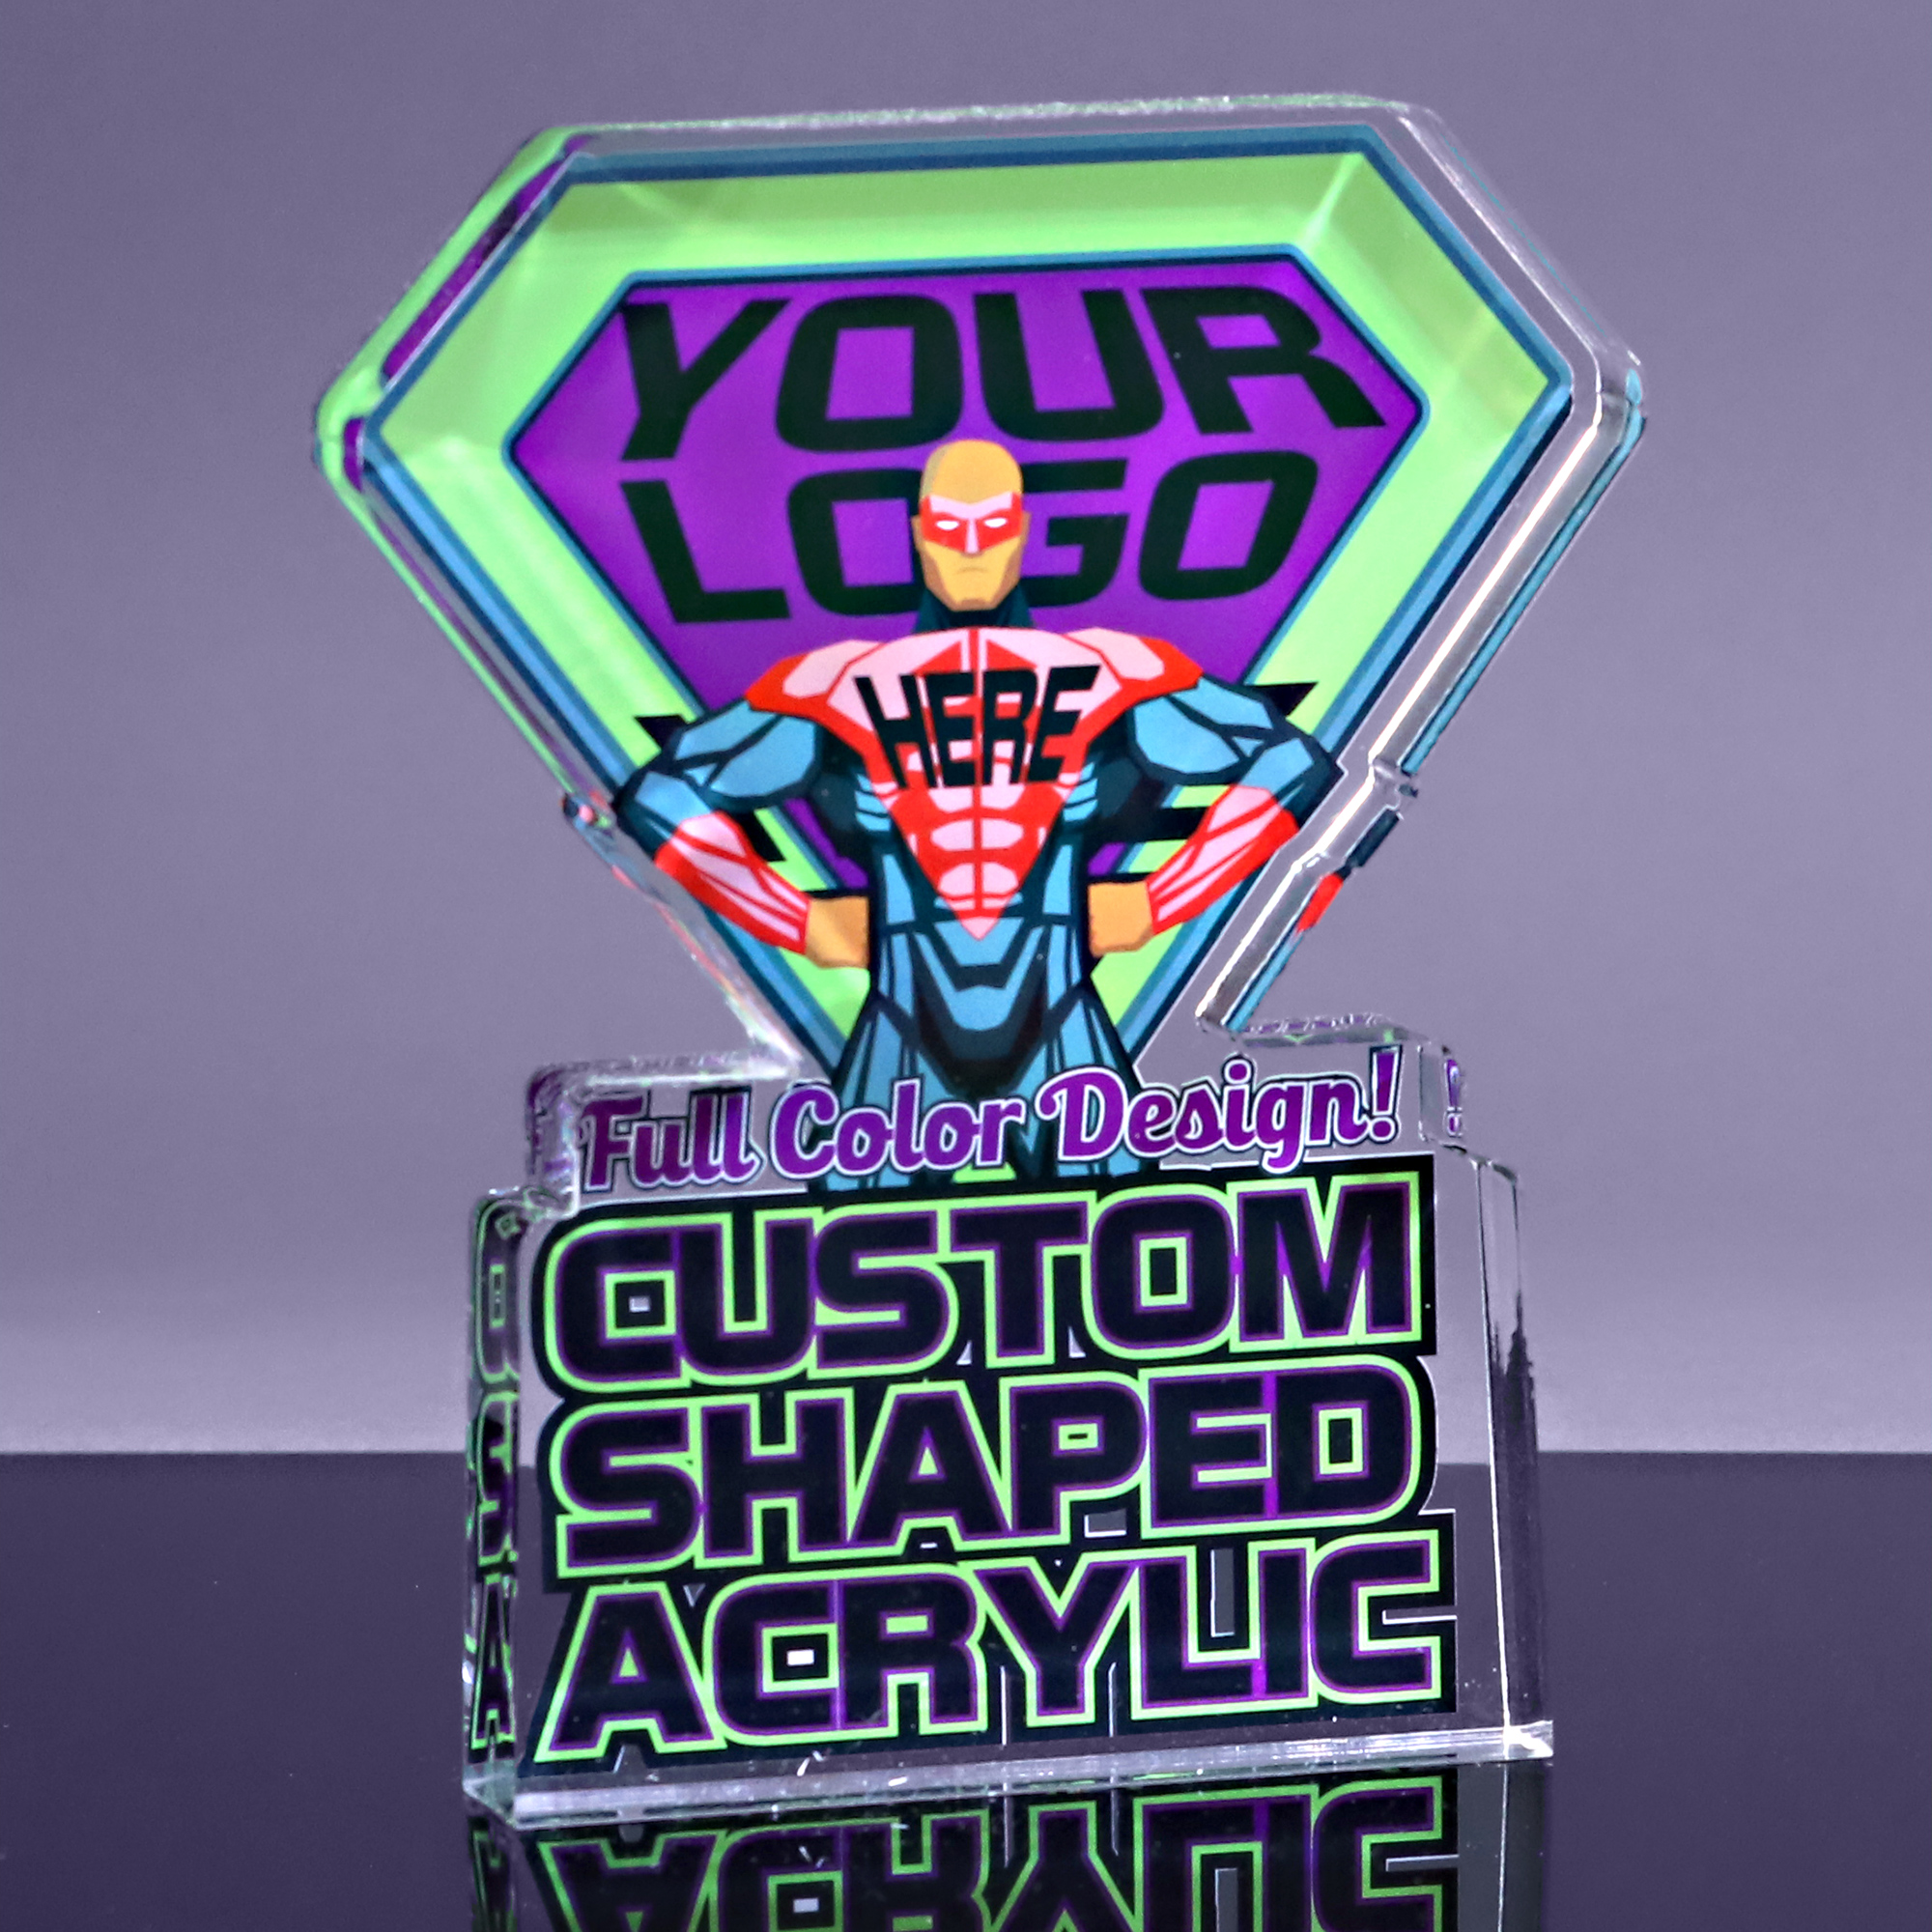  1 inch thick Custom Shaped Acrylic Award - 7 to 7.9 inches 